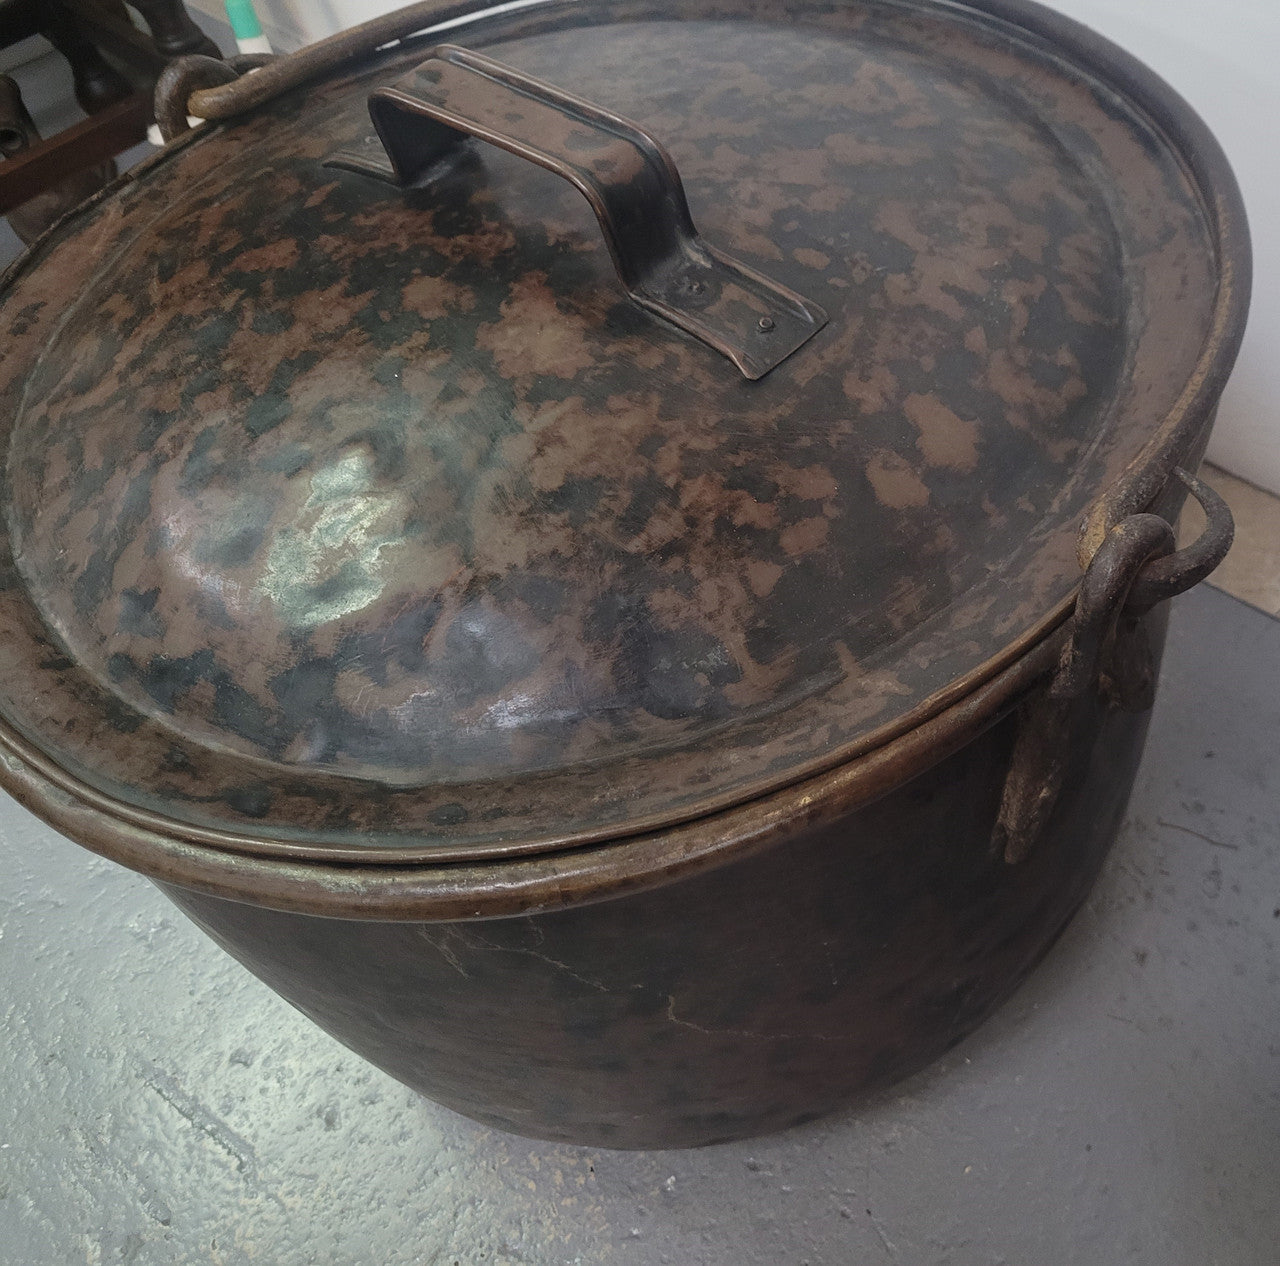 Large French brass cauldron with lid and handle. It is in original condition with some signs of wear please view photos.